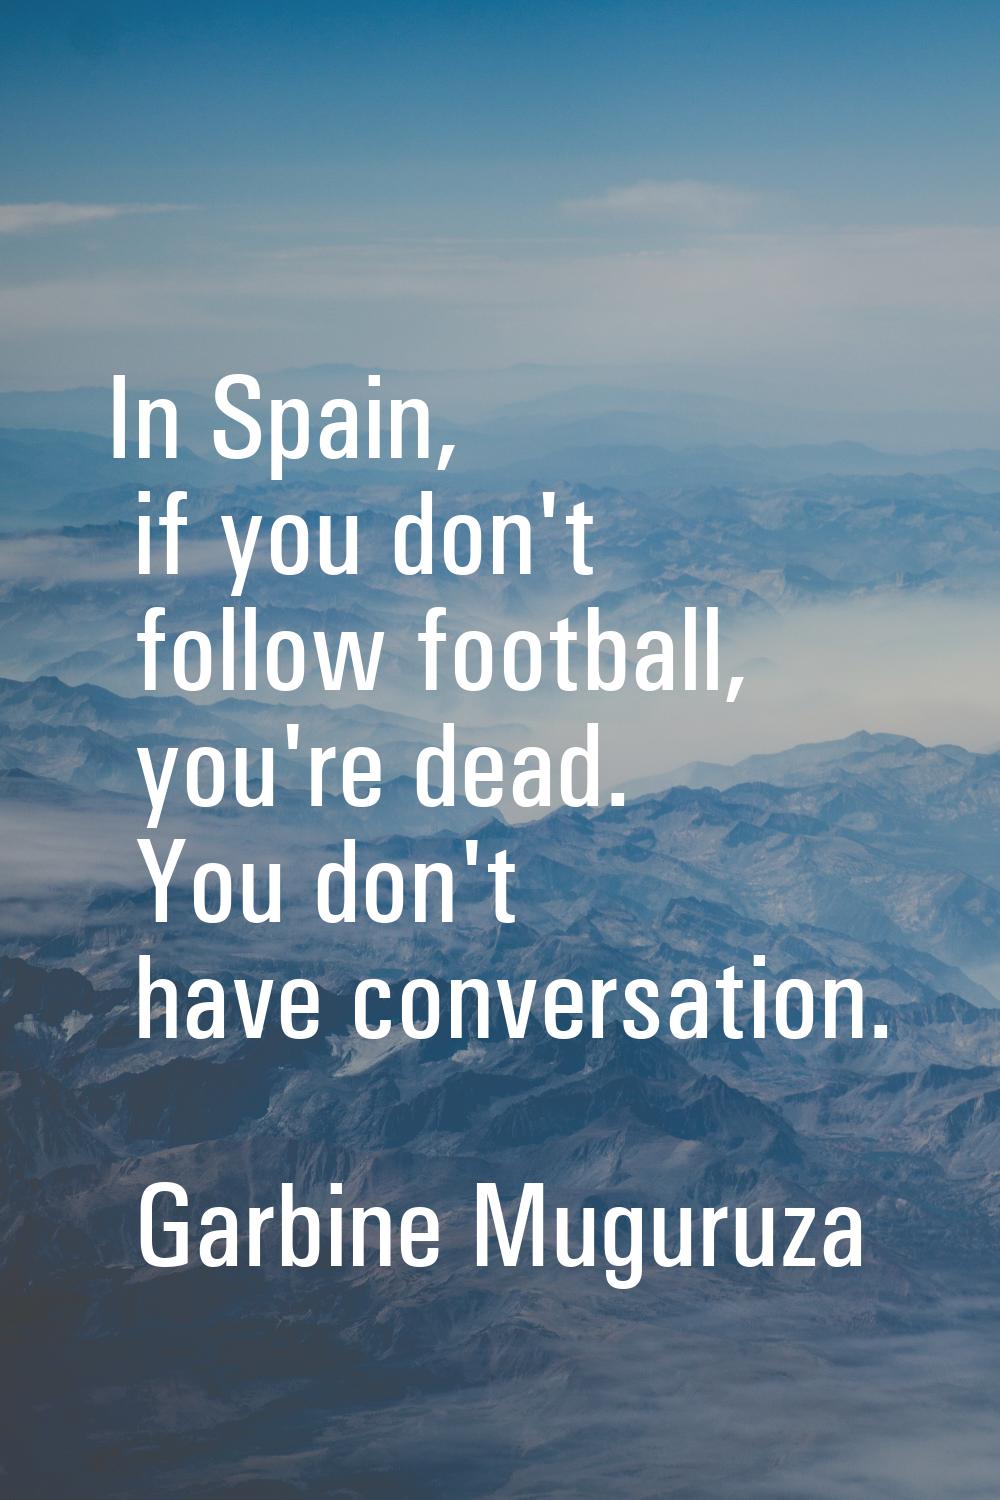 In Spain, if you don't follow football, you're dead. You don't have conversation.